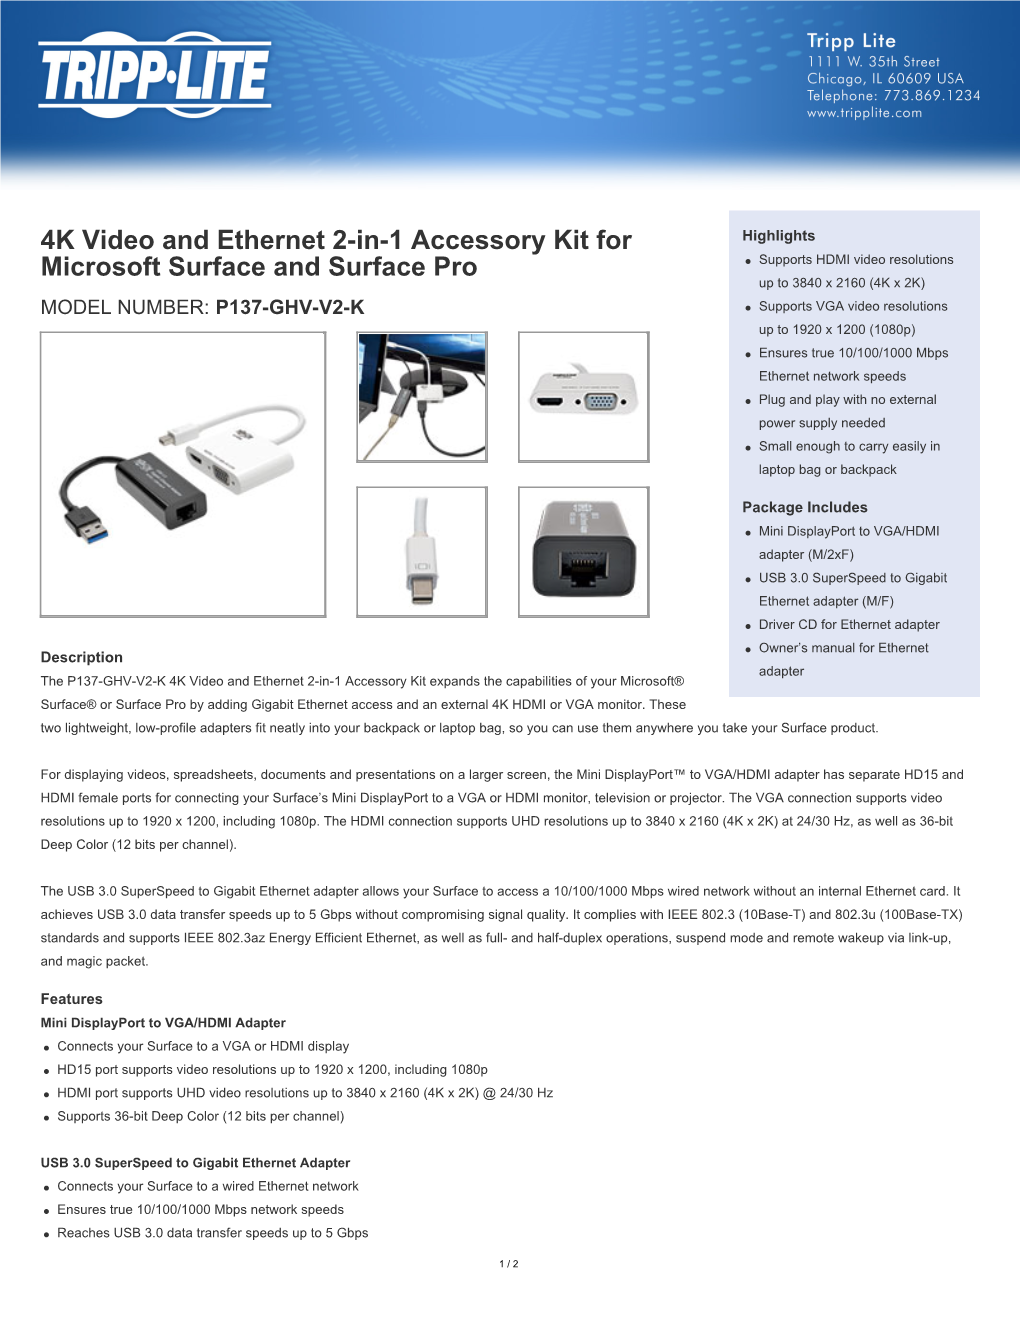 4K Video and Ethernet 2-In-1 Accessory Kit for Microsoft Surface